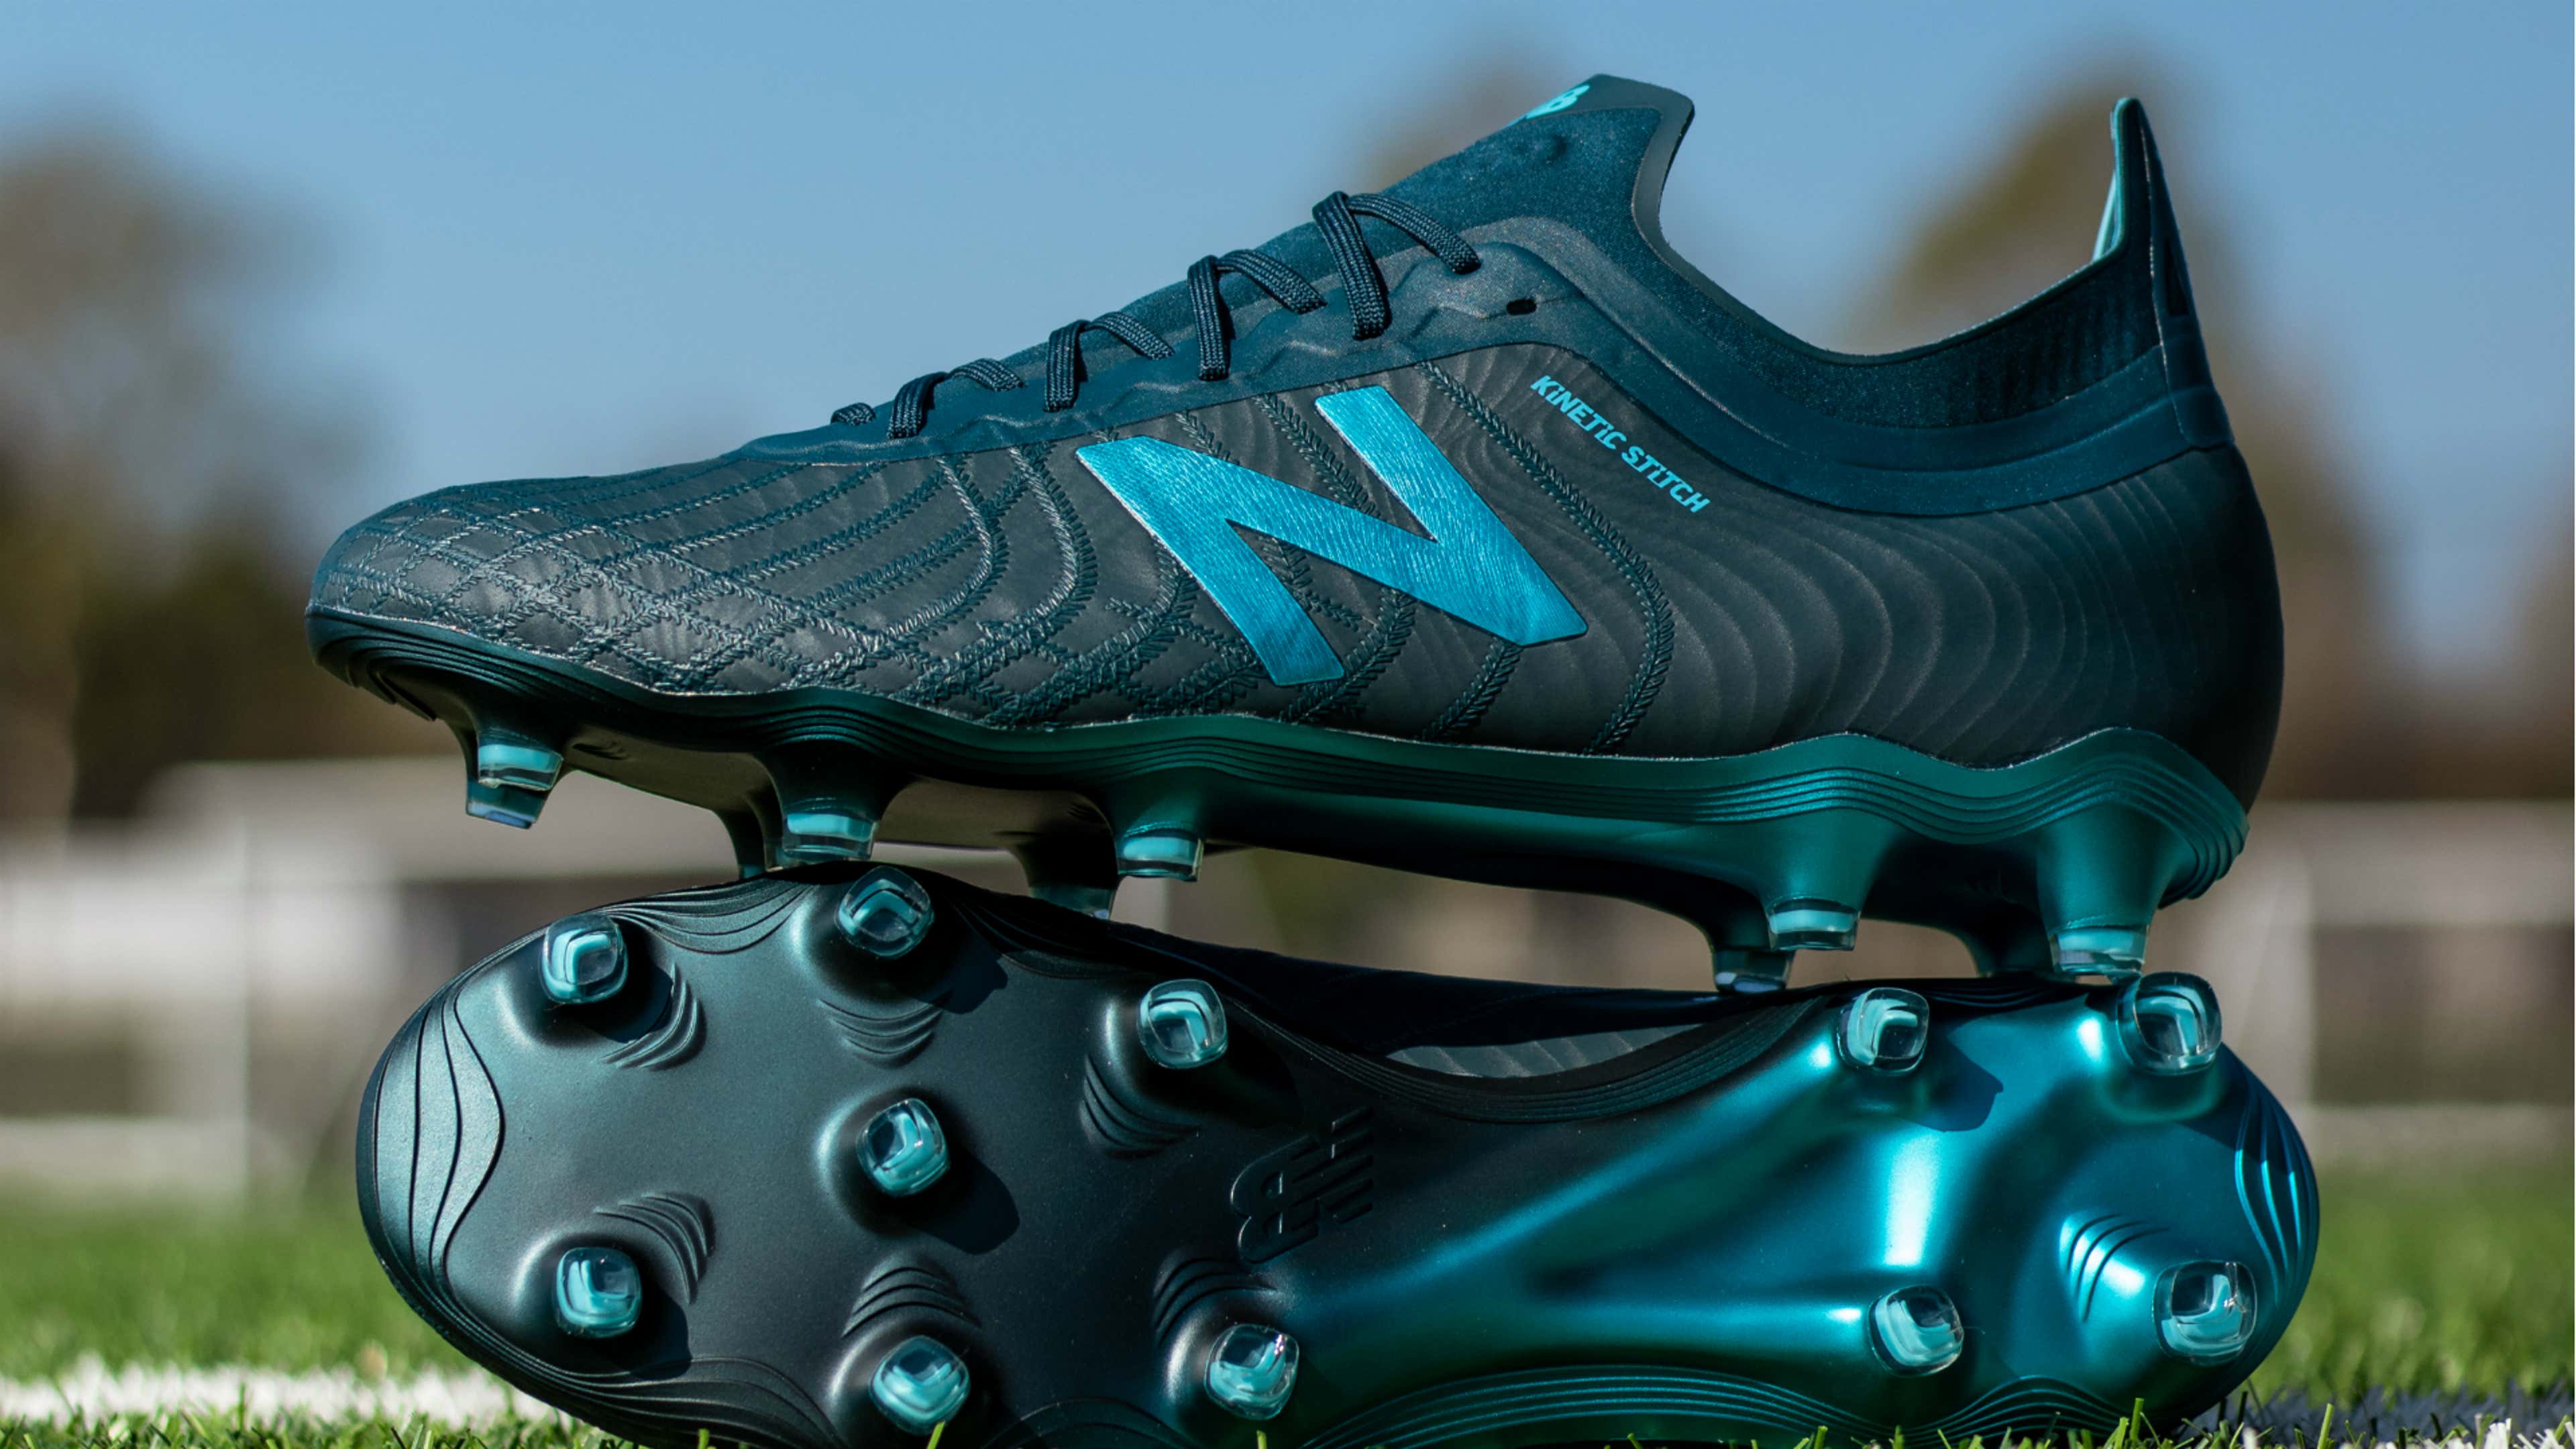 Bandiet Vermenigvuldiging viering VIDEO: You don't want to be anywhere near me on the pitch - introducing the New  Balance Tekela v2 | Goal.com South Africa